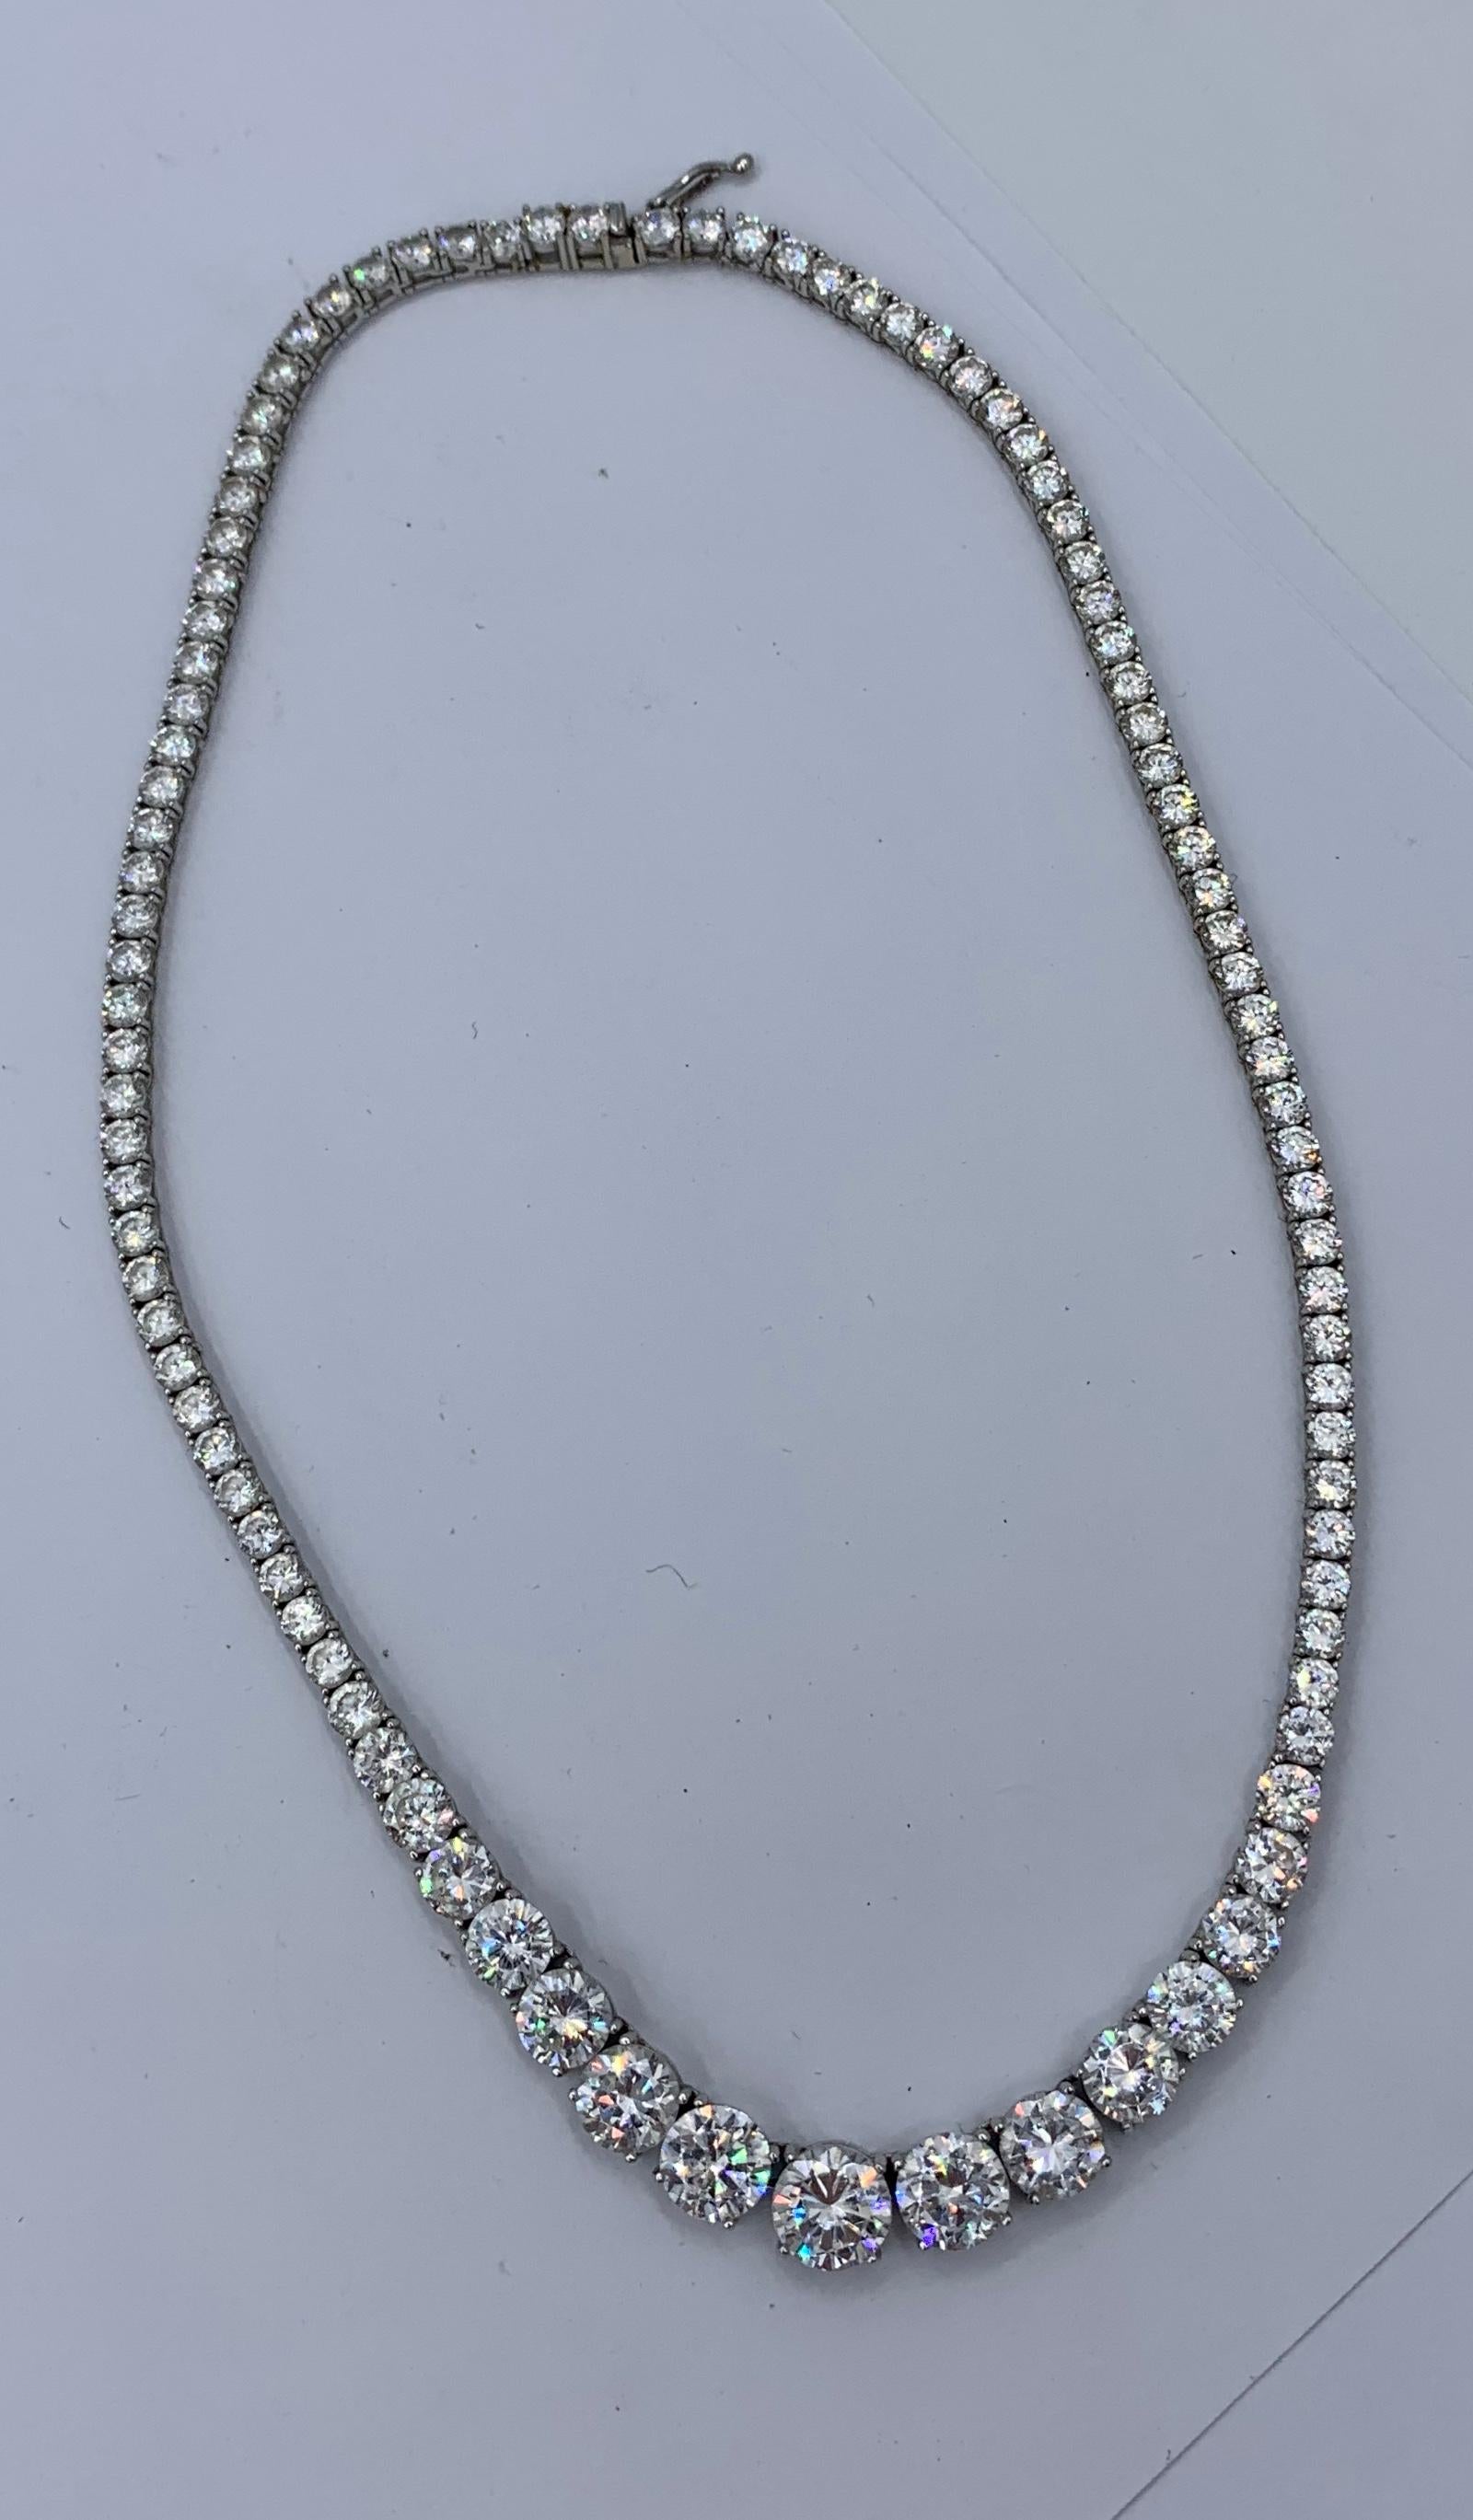 This is a gorgeous Diamond Paste Riviere Necklace in 14 Karat White Gold belonging to Academy Award Winning actress Celeste Holm with photos of Ms. Holm wearing the iconic necklace.  The necklace is one of Celeste Holm's iconic jewels.  The Oscar